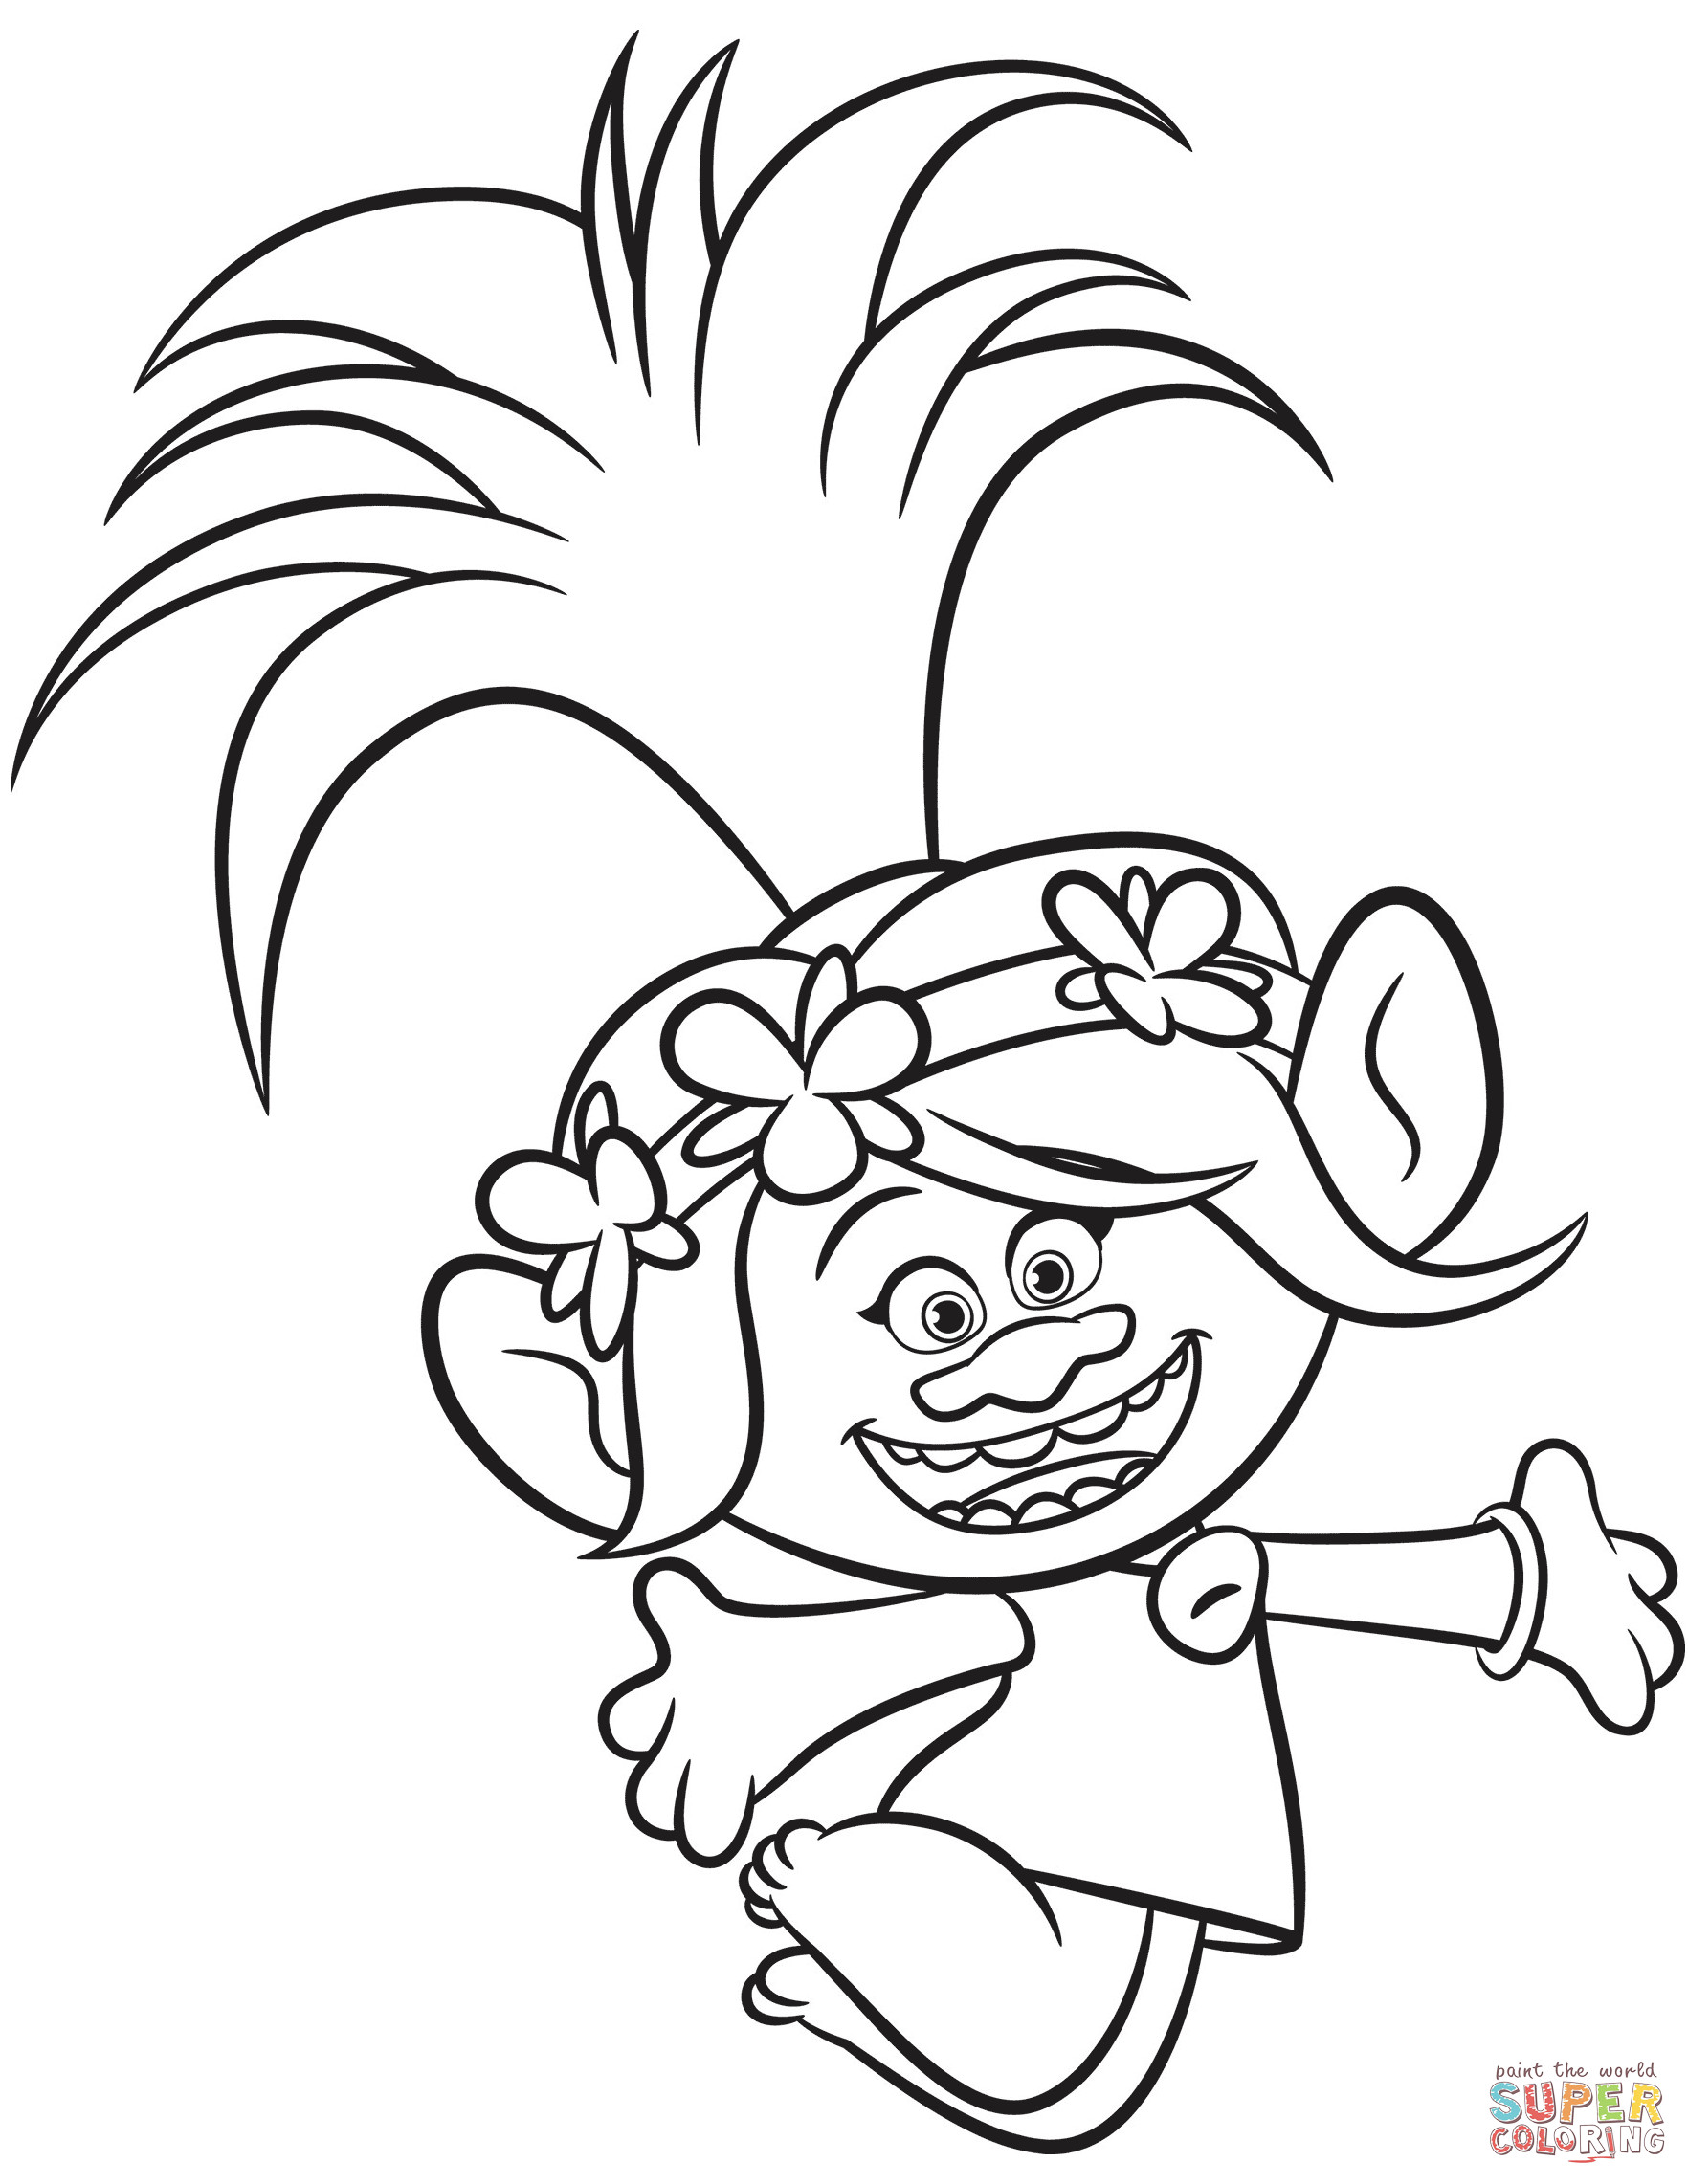 Poppy from Trolls coloring page